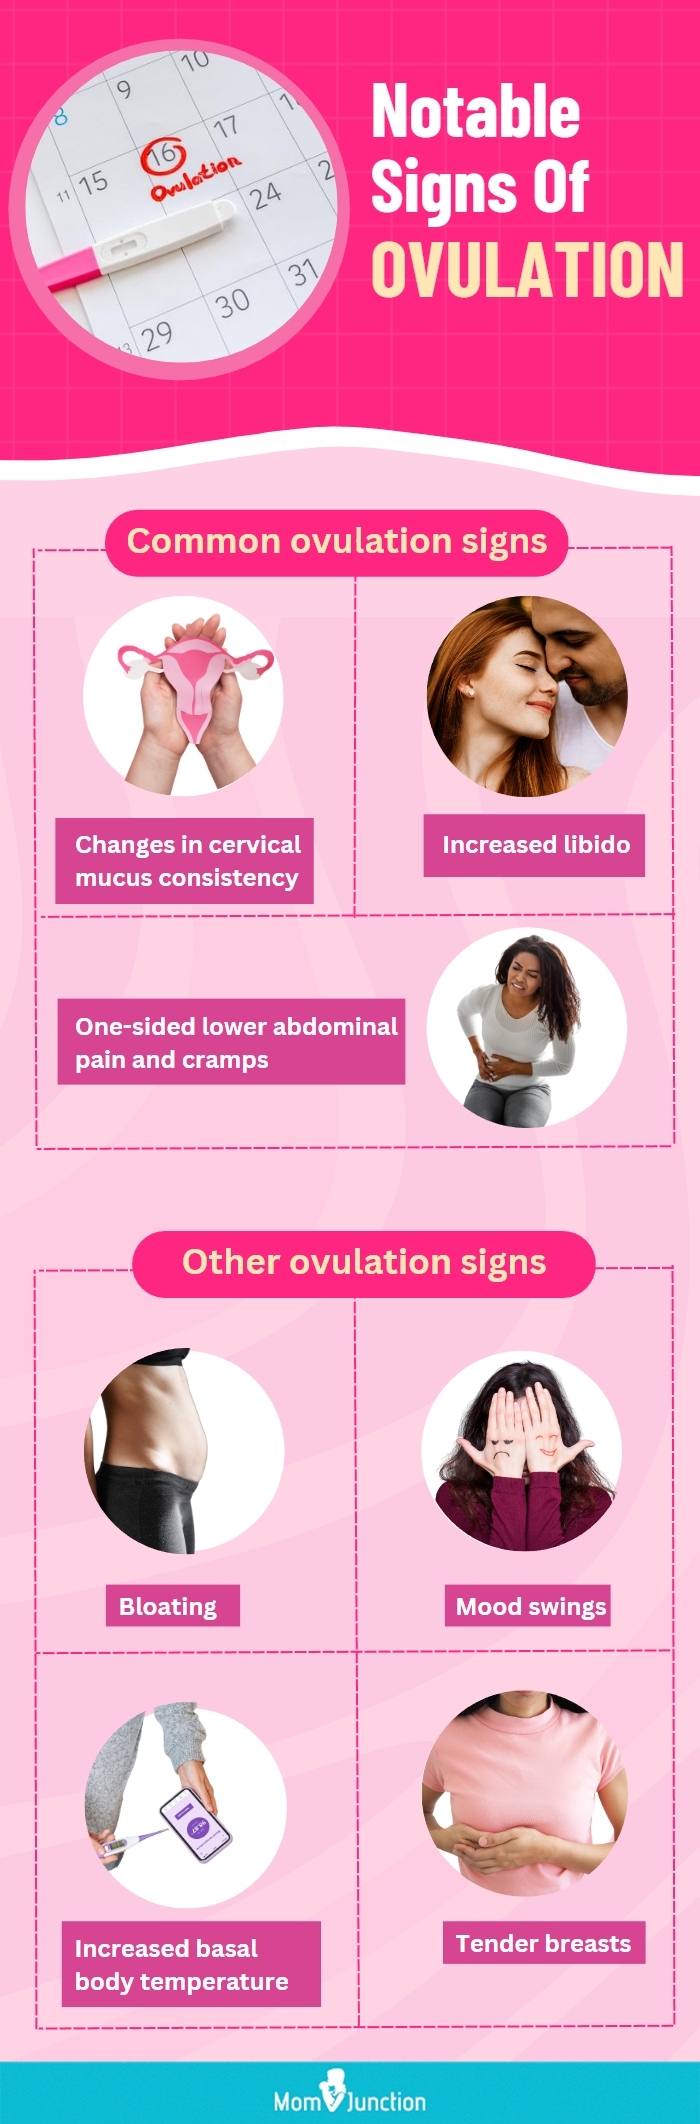 notable signs of ovulation (infographic)